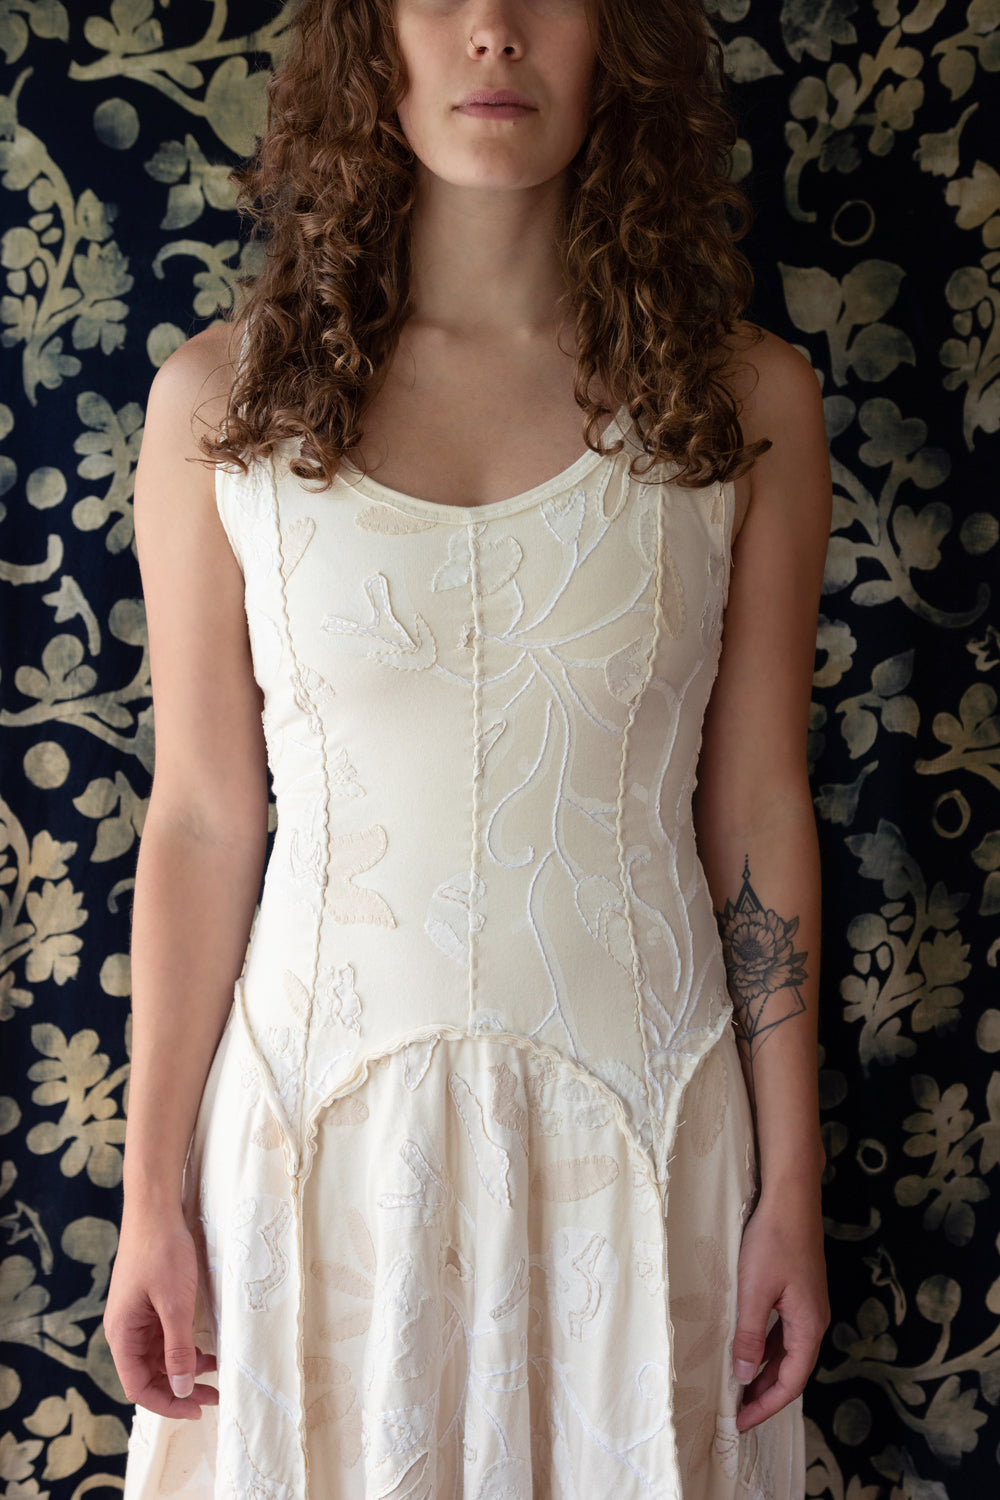 The Tenby Dress with hand-sewn seams, floral appliqué, and embroidery. Model is shown in Natural colorway.